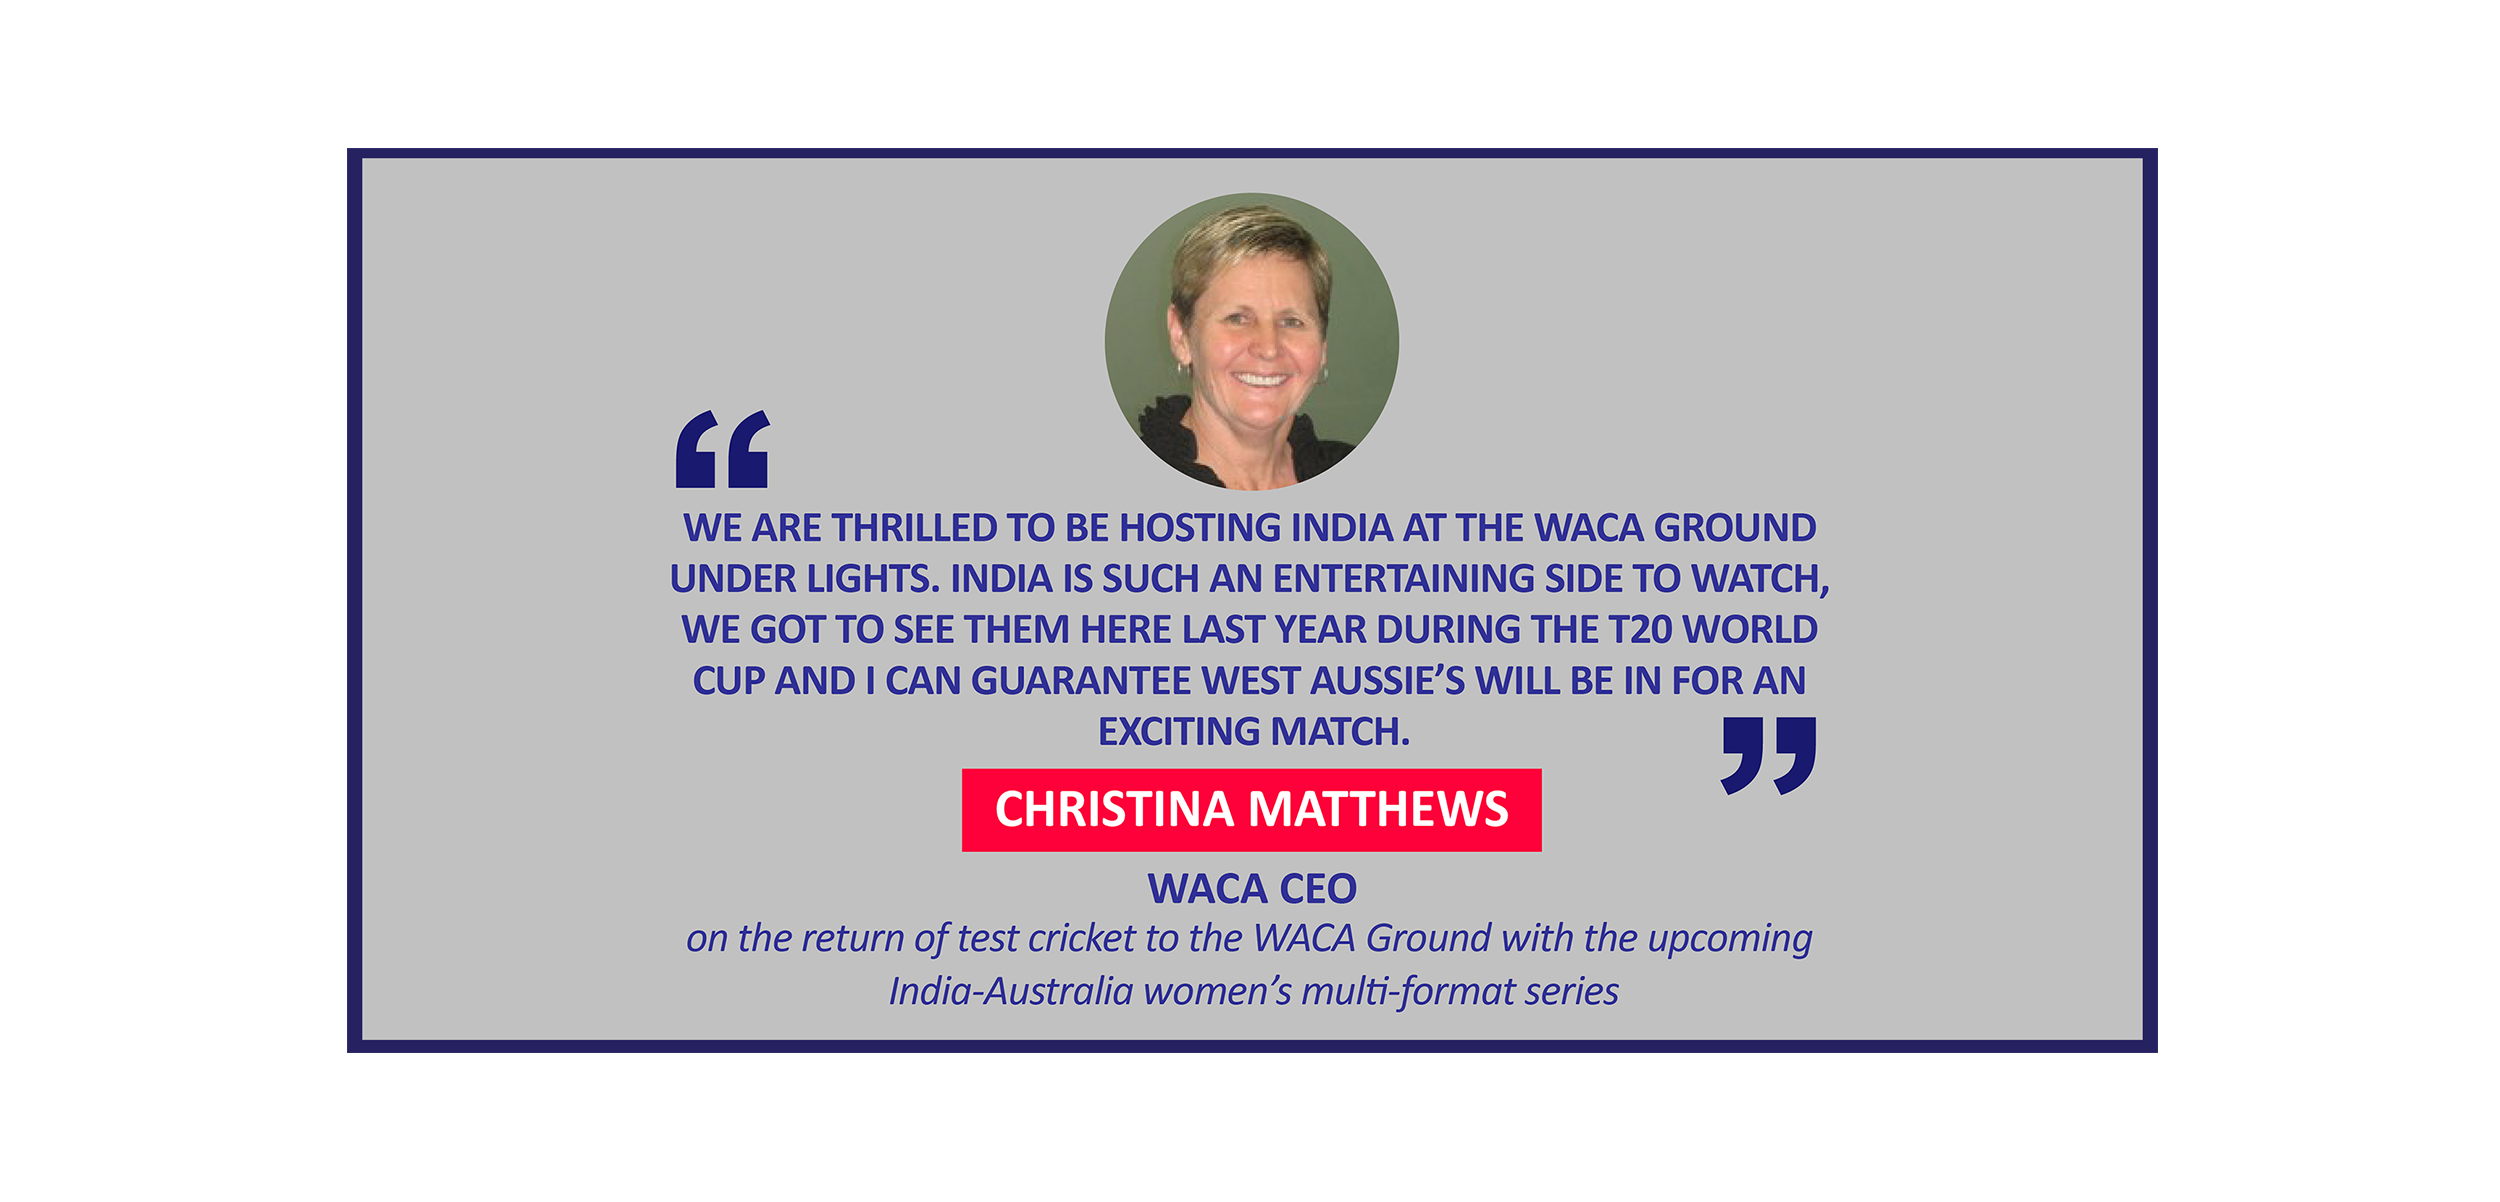 Christina Matthews, WACA CEO on the return of test cricket to the WACA Ground with the upcoming India-Australia women’s multi-format series